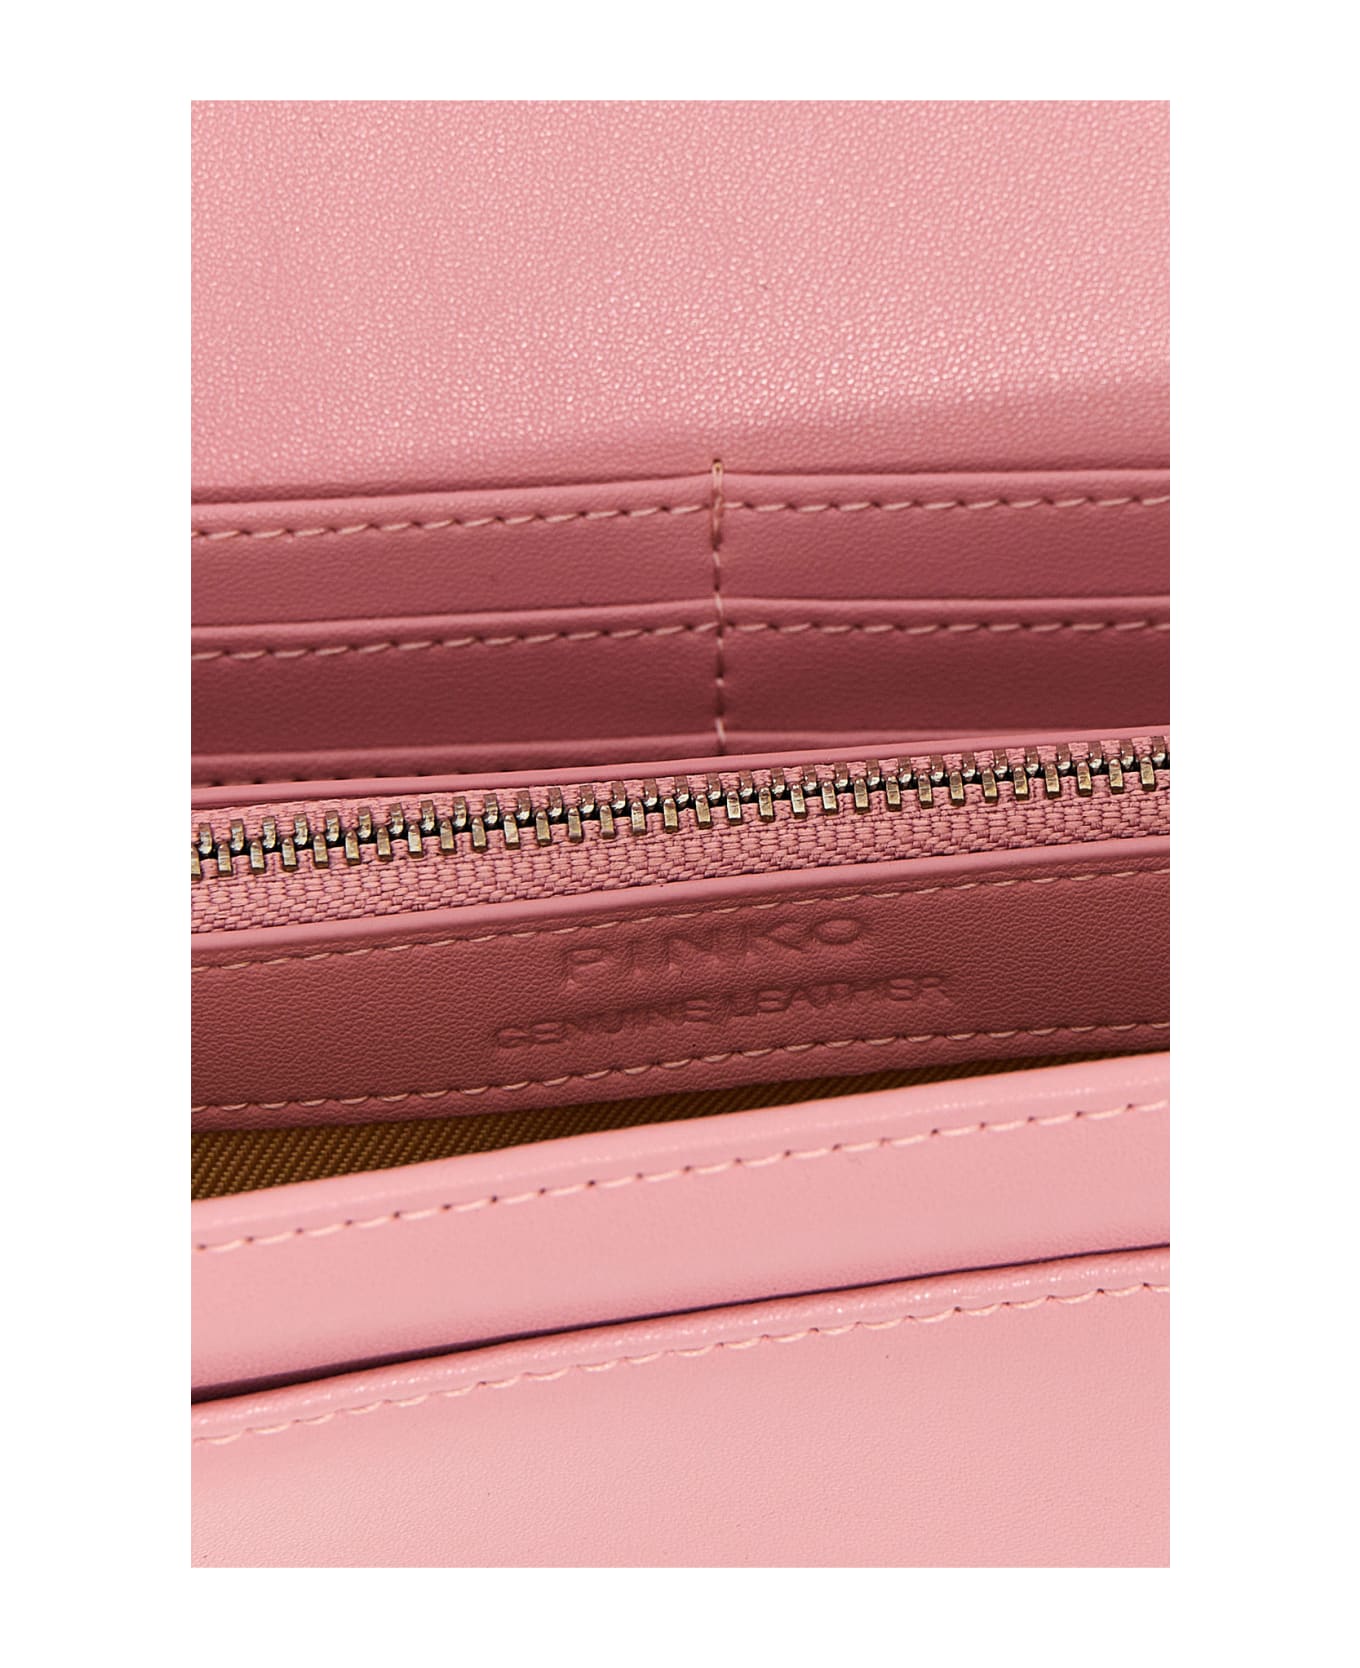 Pinko Love One Leather Wallet On Chain - Pink